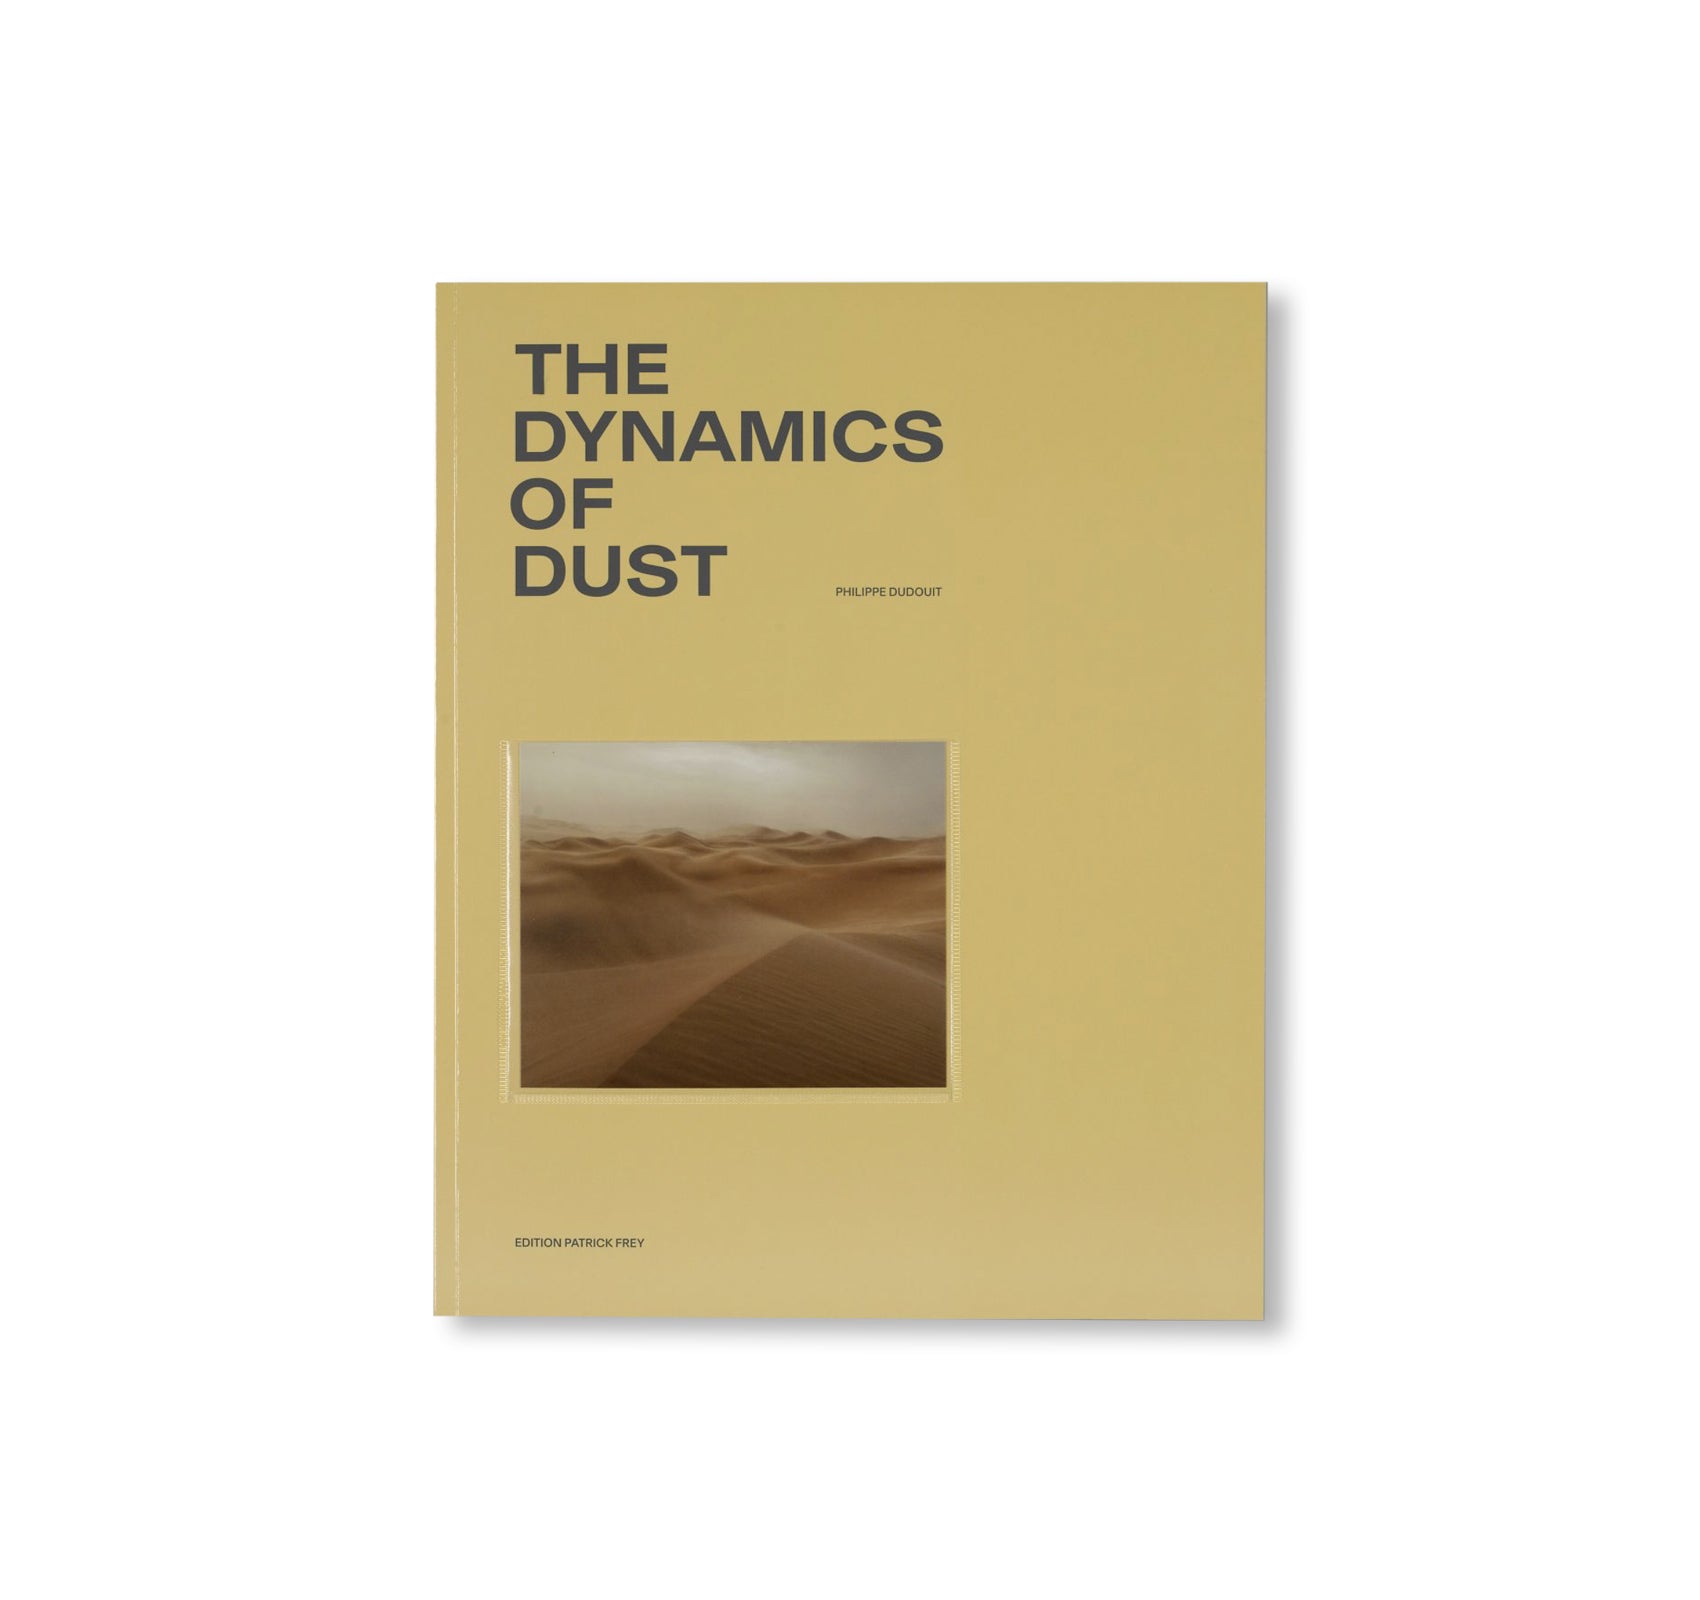 THE DYNAMICS OF DUST by Philippe Dudouit